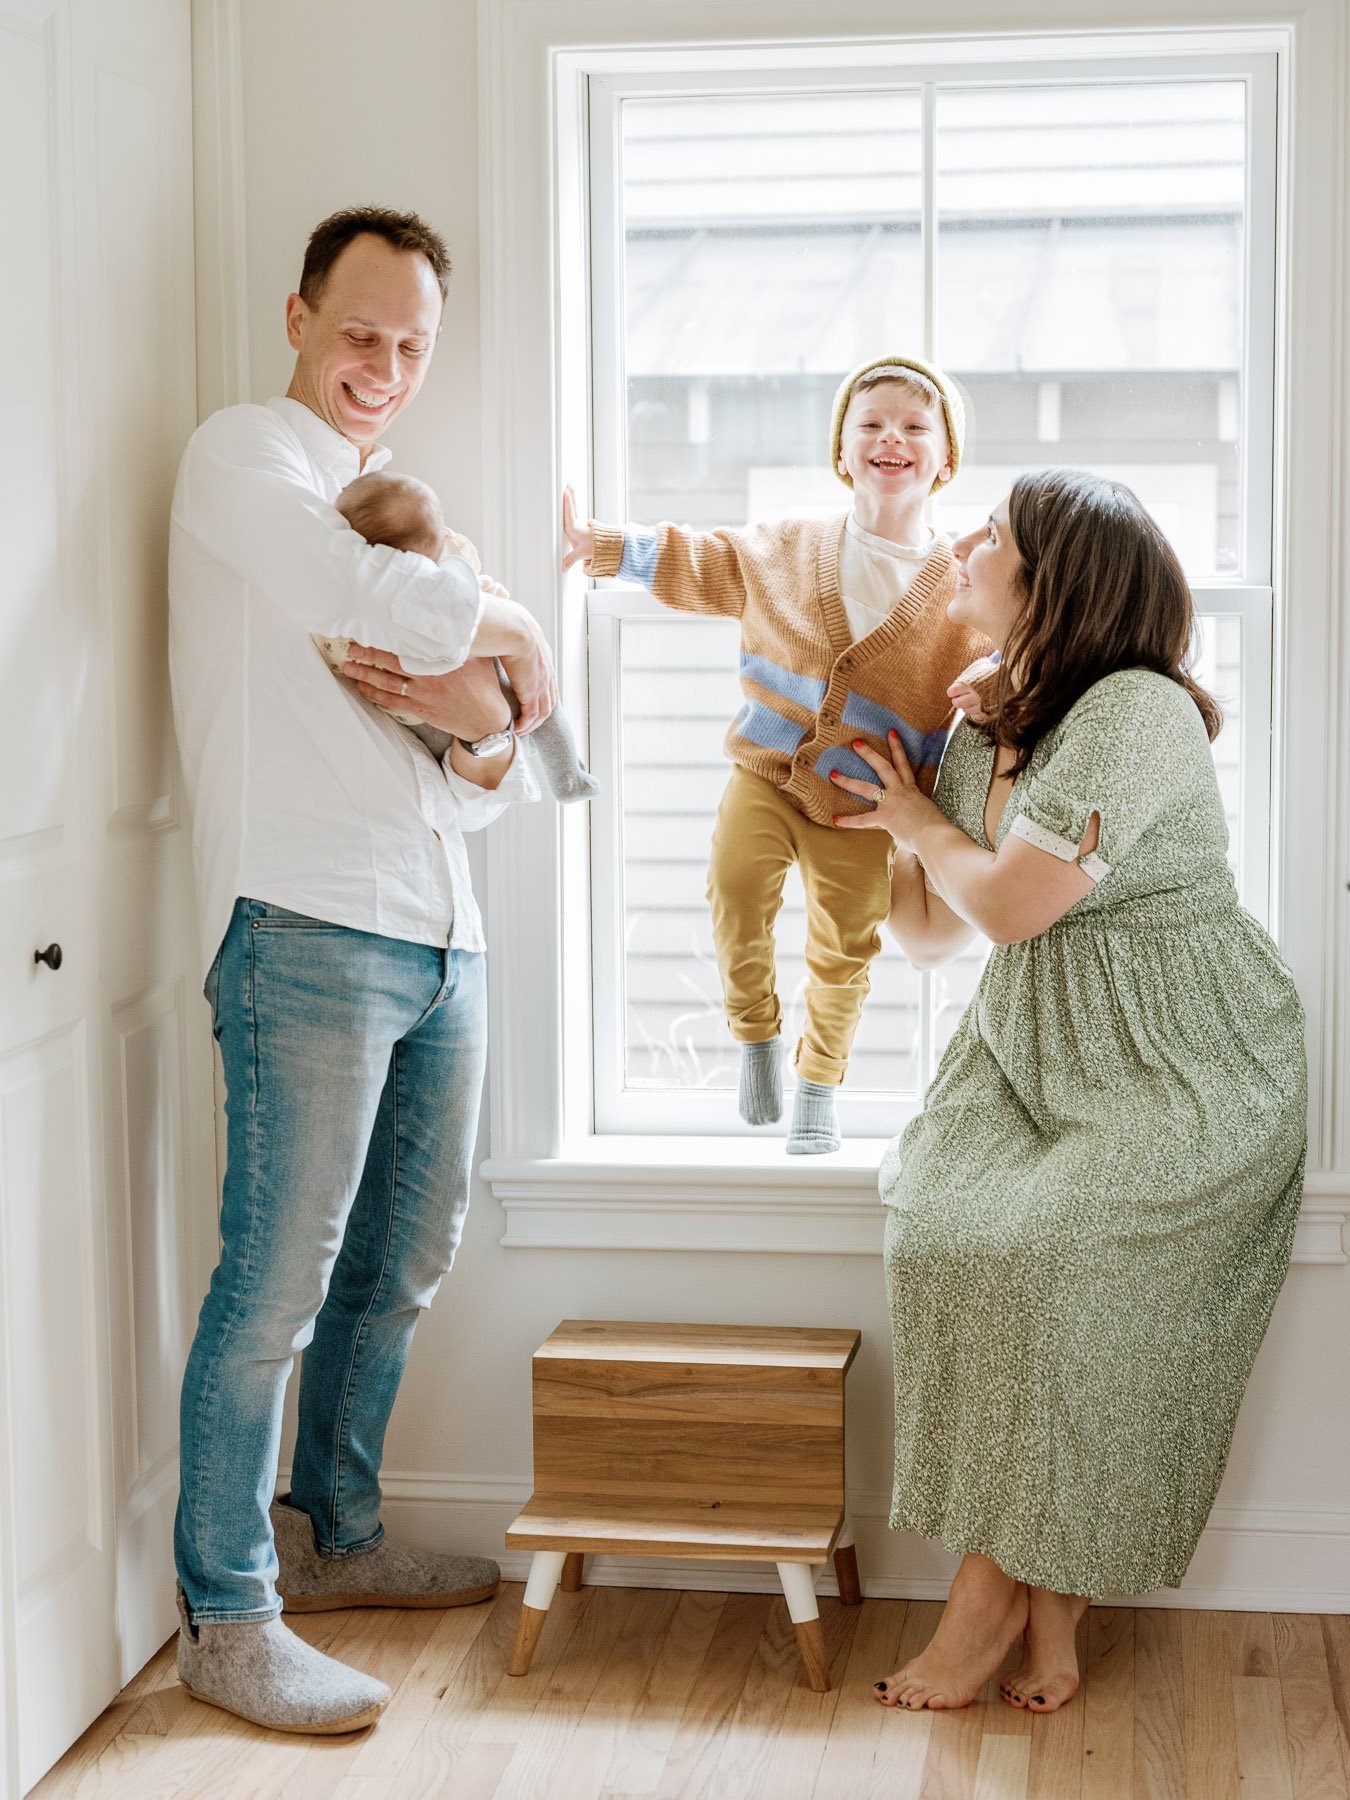 Saratoga Springs Newborn and Family Portraits by Michelle Lange Photography-21.jpg